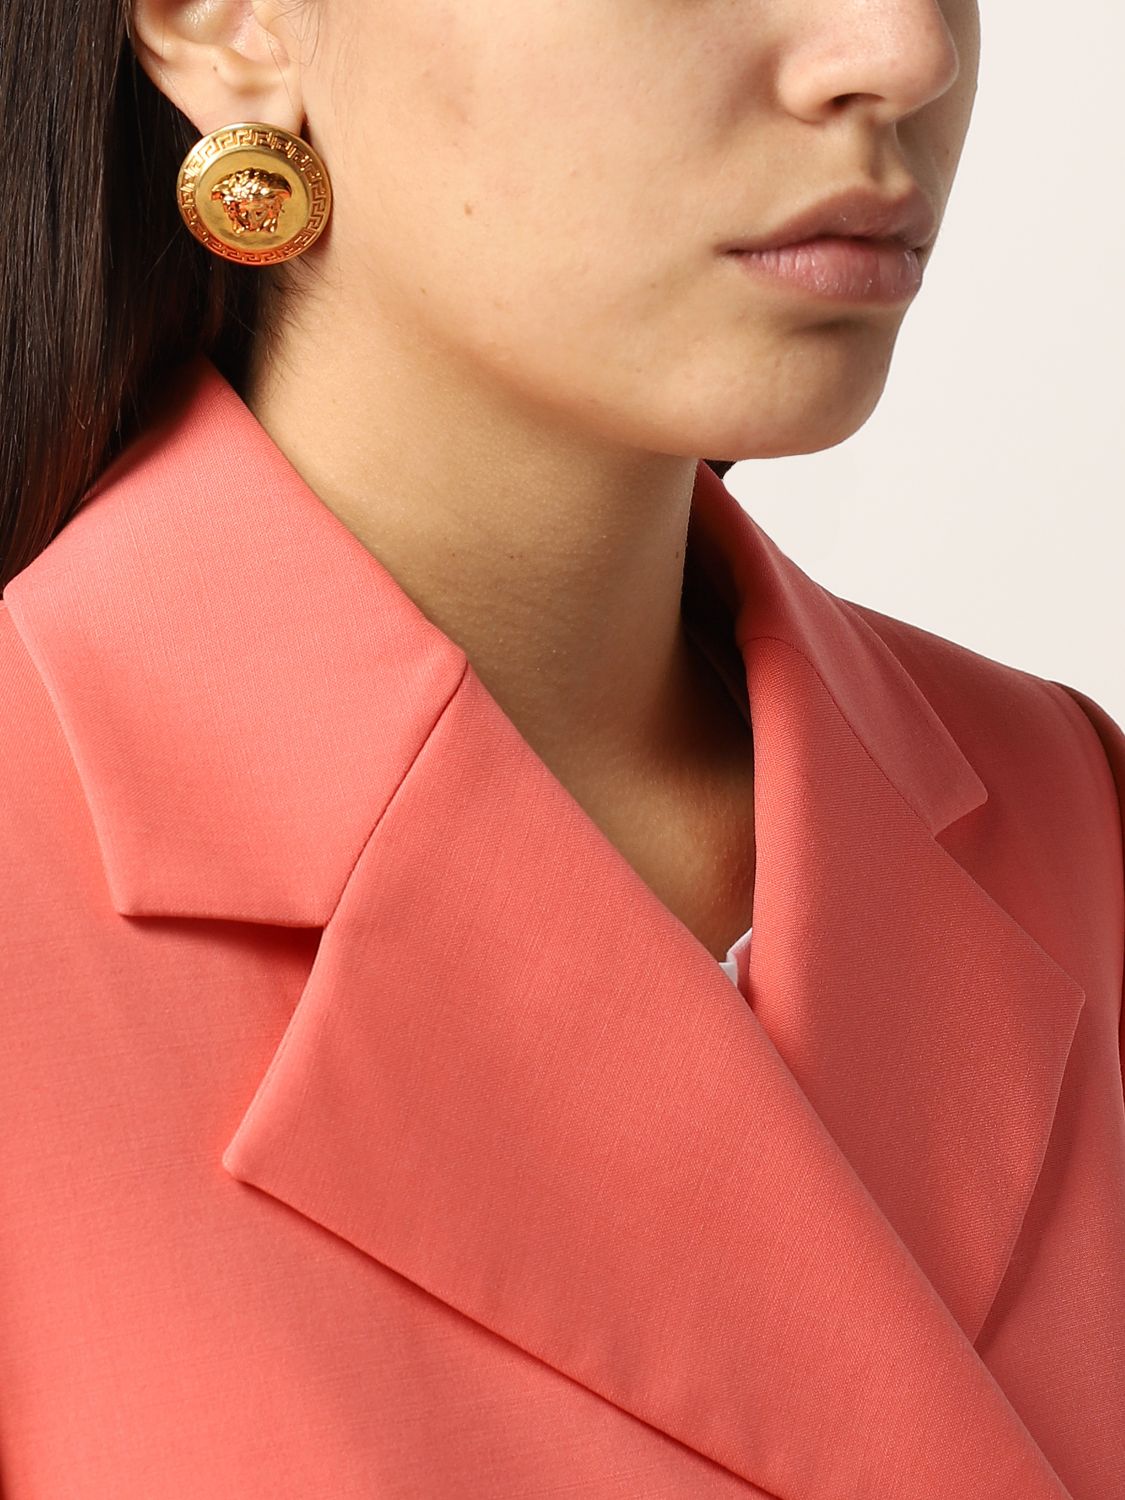 Jewel Versace: Versace Tribute button earrings with Medusa gold 2